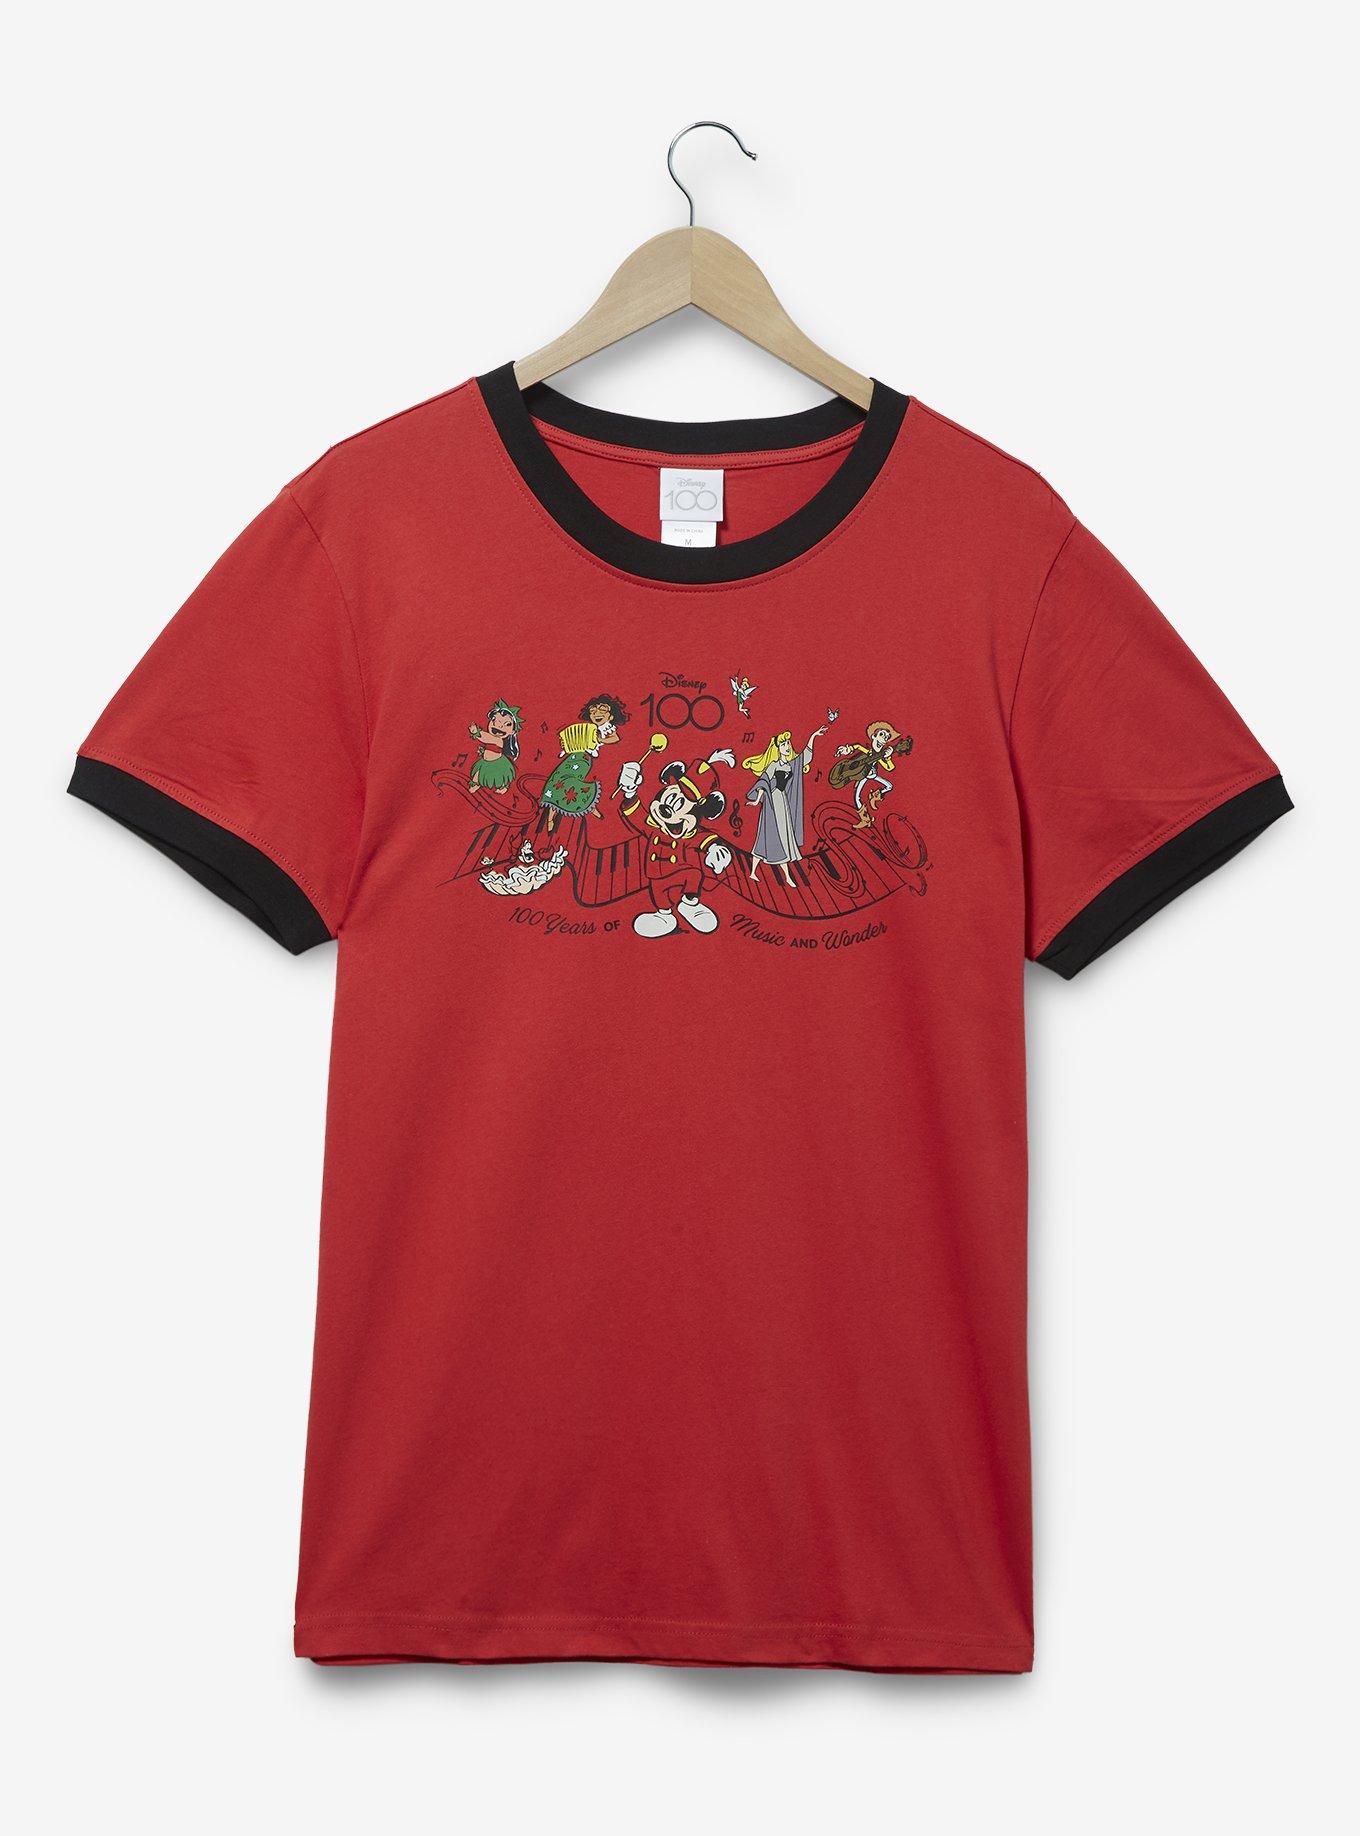 Disney 100 Musical Characters Ringer T-Shirt - BoxLunch Exclusive, RED, hi-res